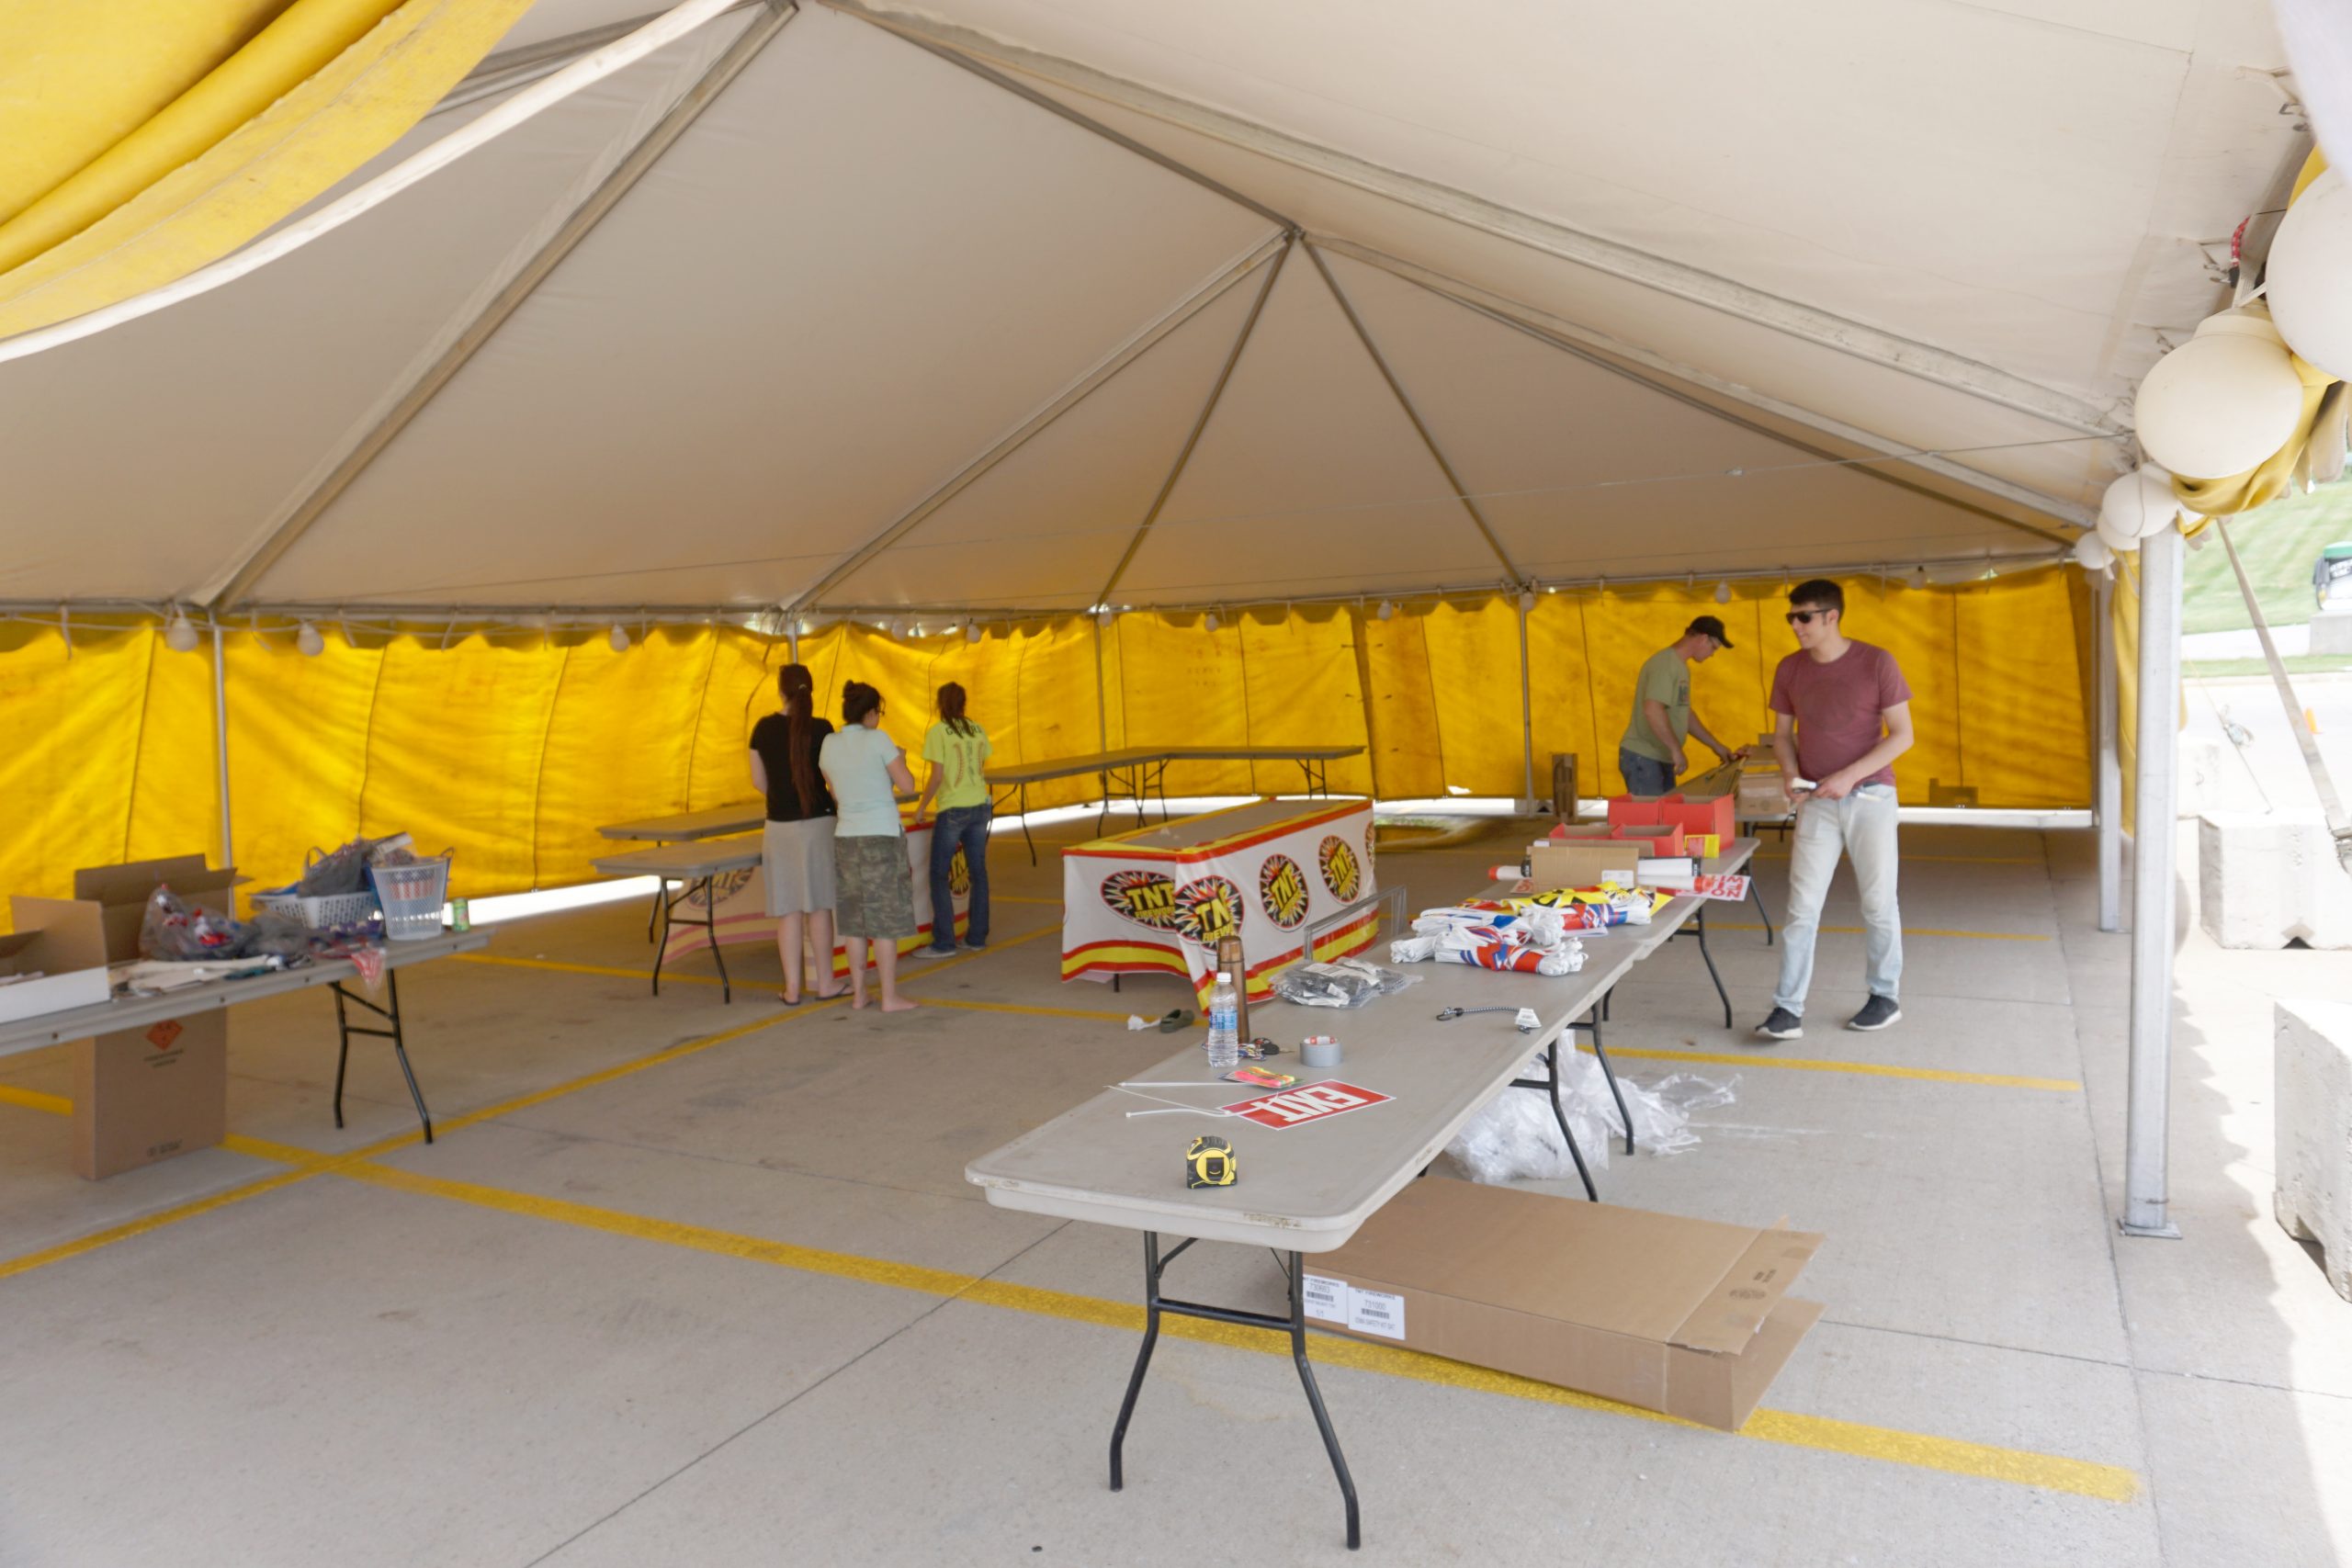 Setting up a fireworks stand at Walmart Supercenter in Iowa City, IA under a 30' x 45' frame tent